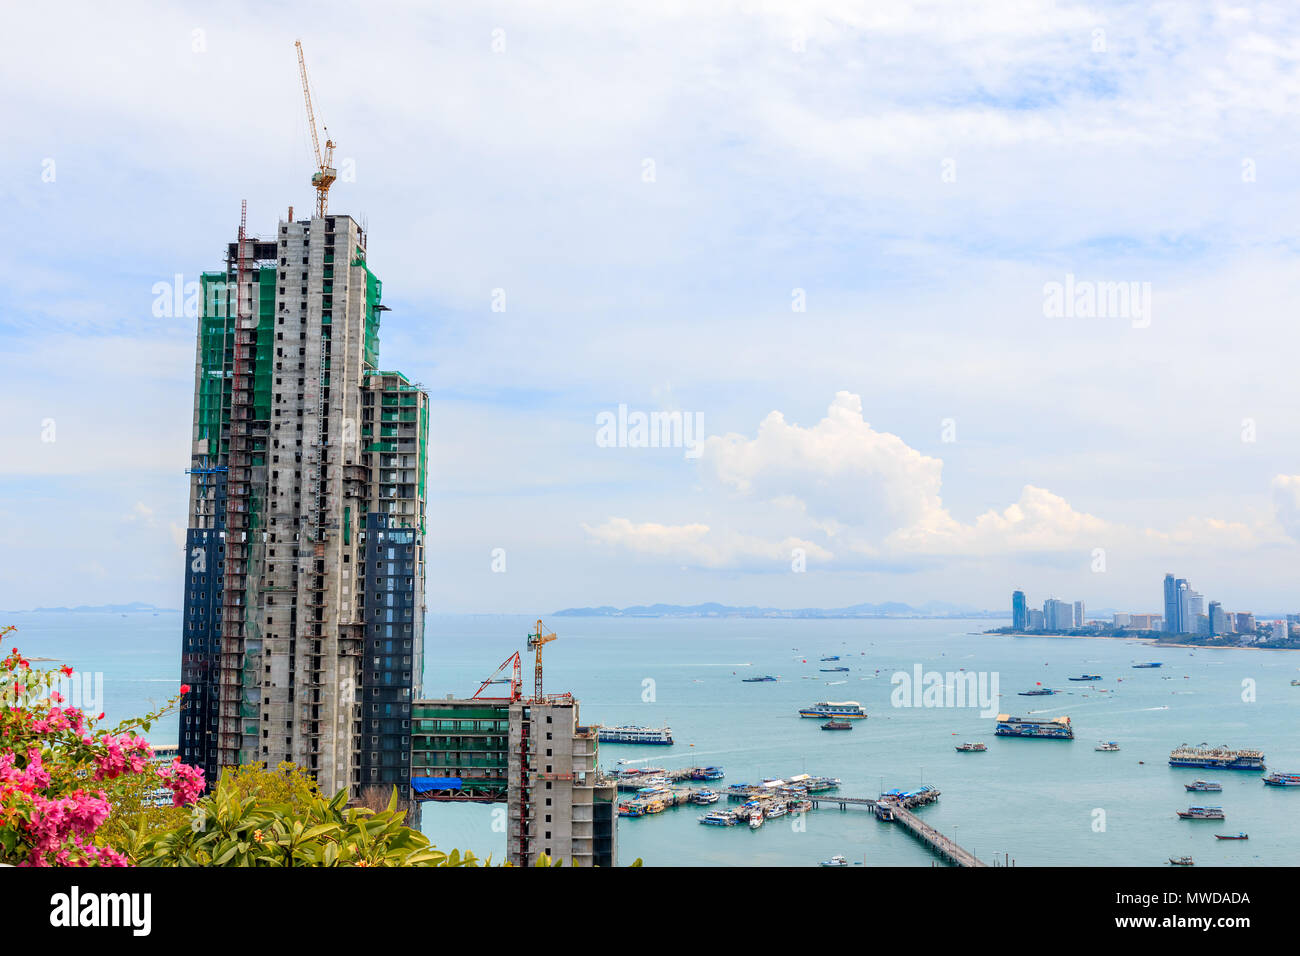 PATTAYA - AUGUST 23, 2014: The new building site name is 'Water Front Suites &a mp ; Residence Pattaya' , Building Obscured the view Pratamnak Hill. A Stock Photo